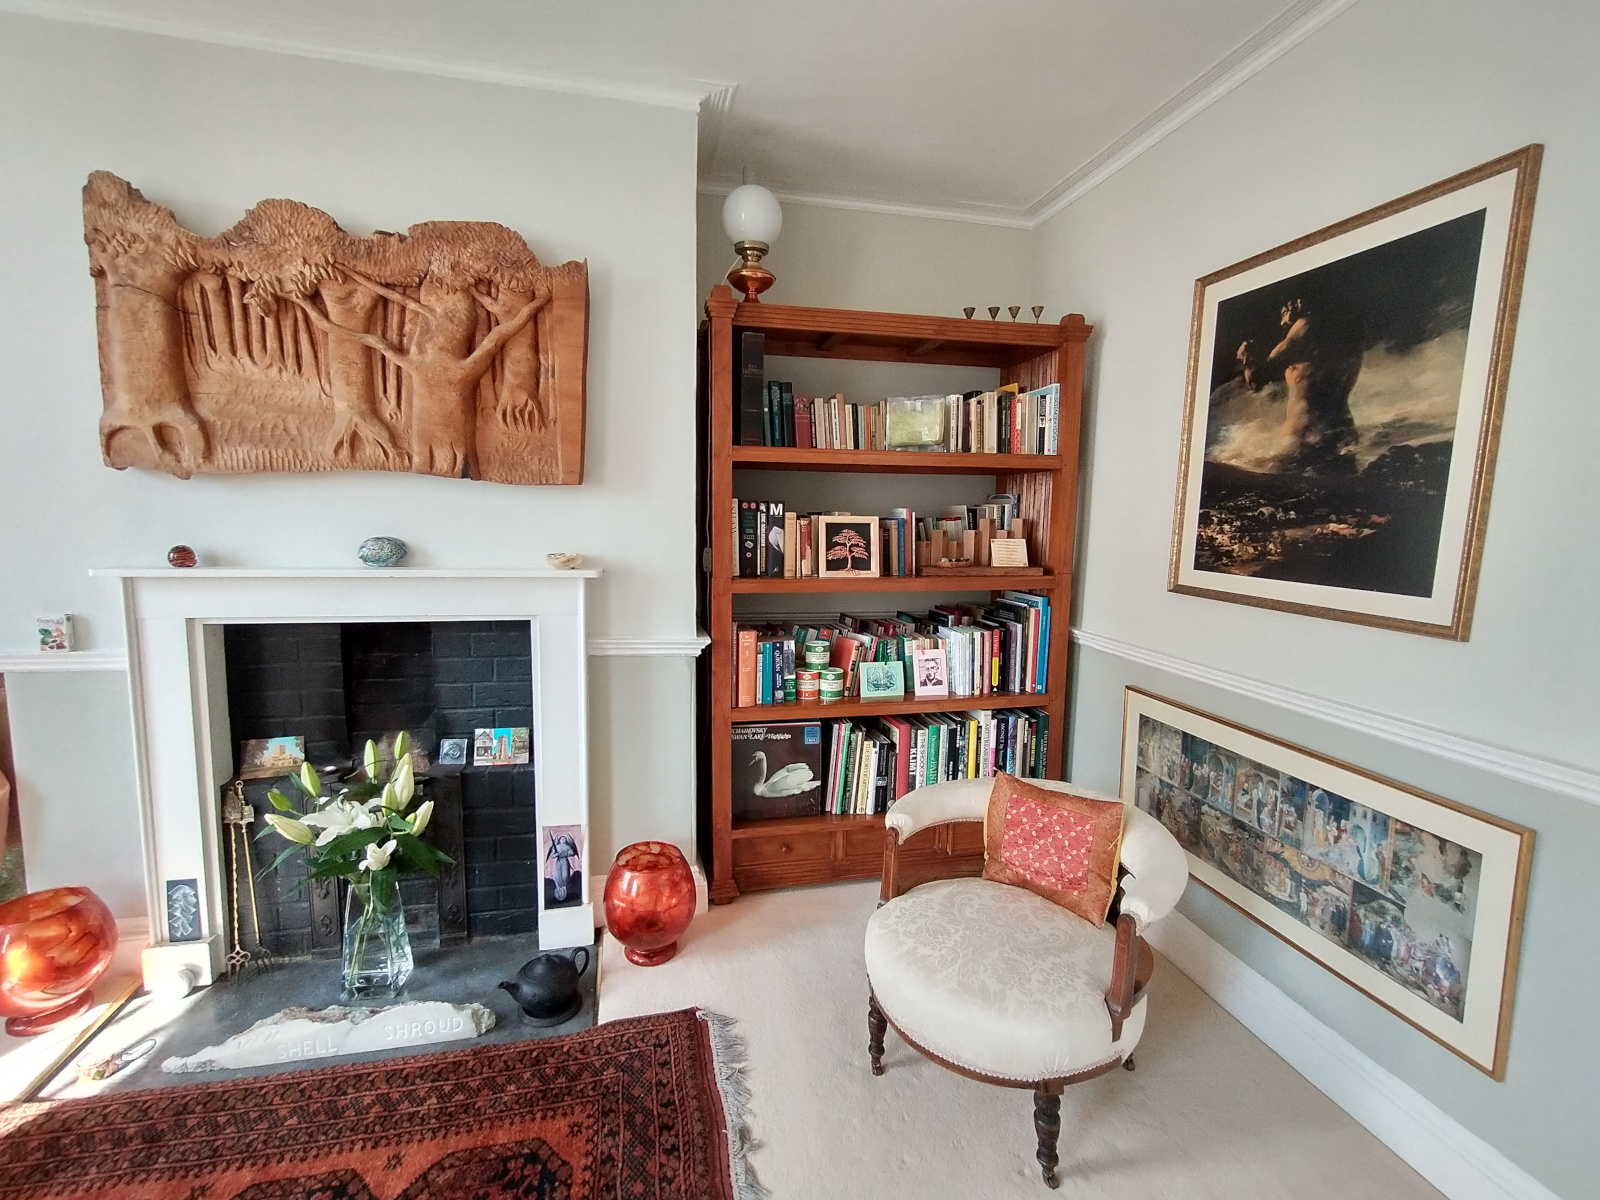 View of living room with fireplace, bookcase and artwork